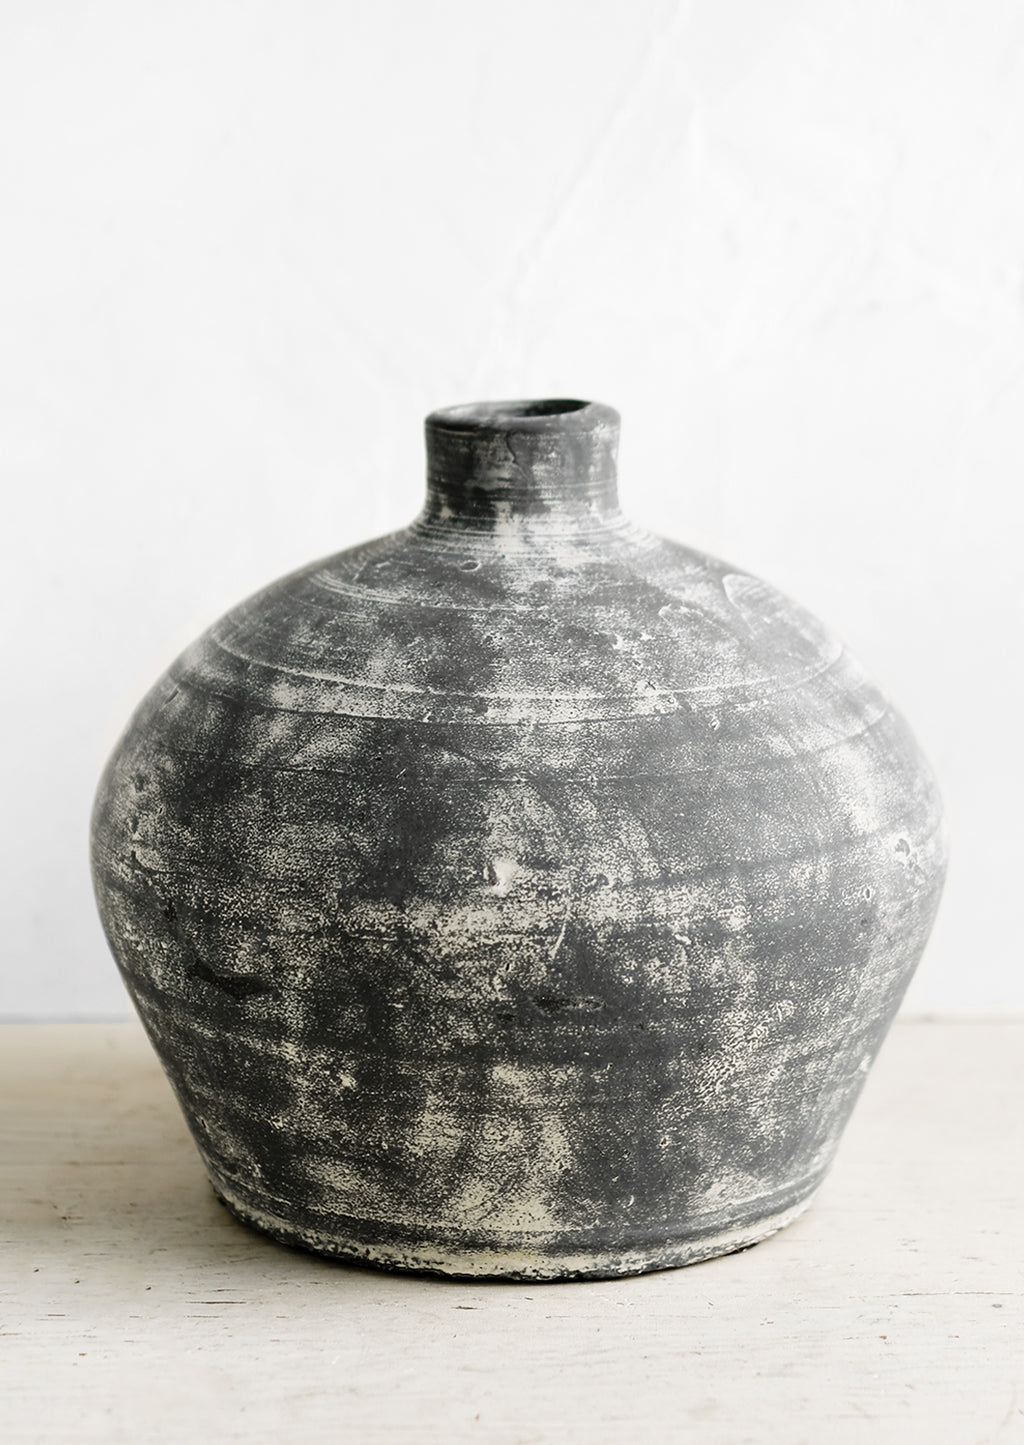 2: A distressed black clay vase with narrow opening.